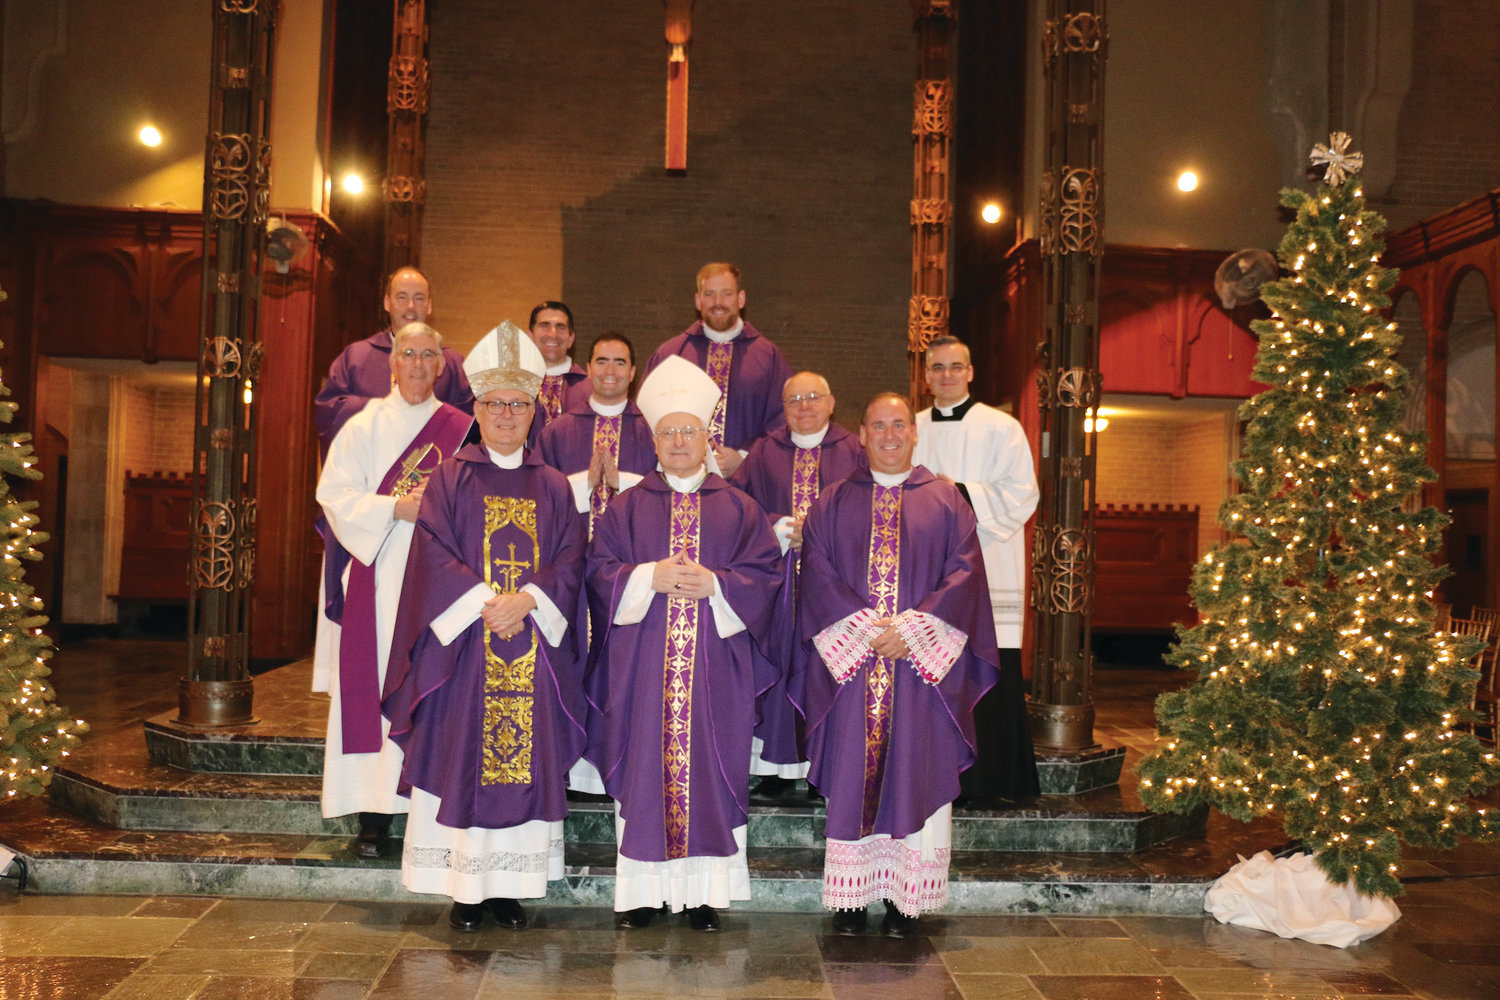 Bishop Tobin and clergy are pictured with Bishop Evans following Mass held prior to the diocesan employee Christmas dinner on December 11.